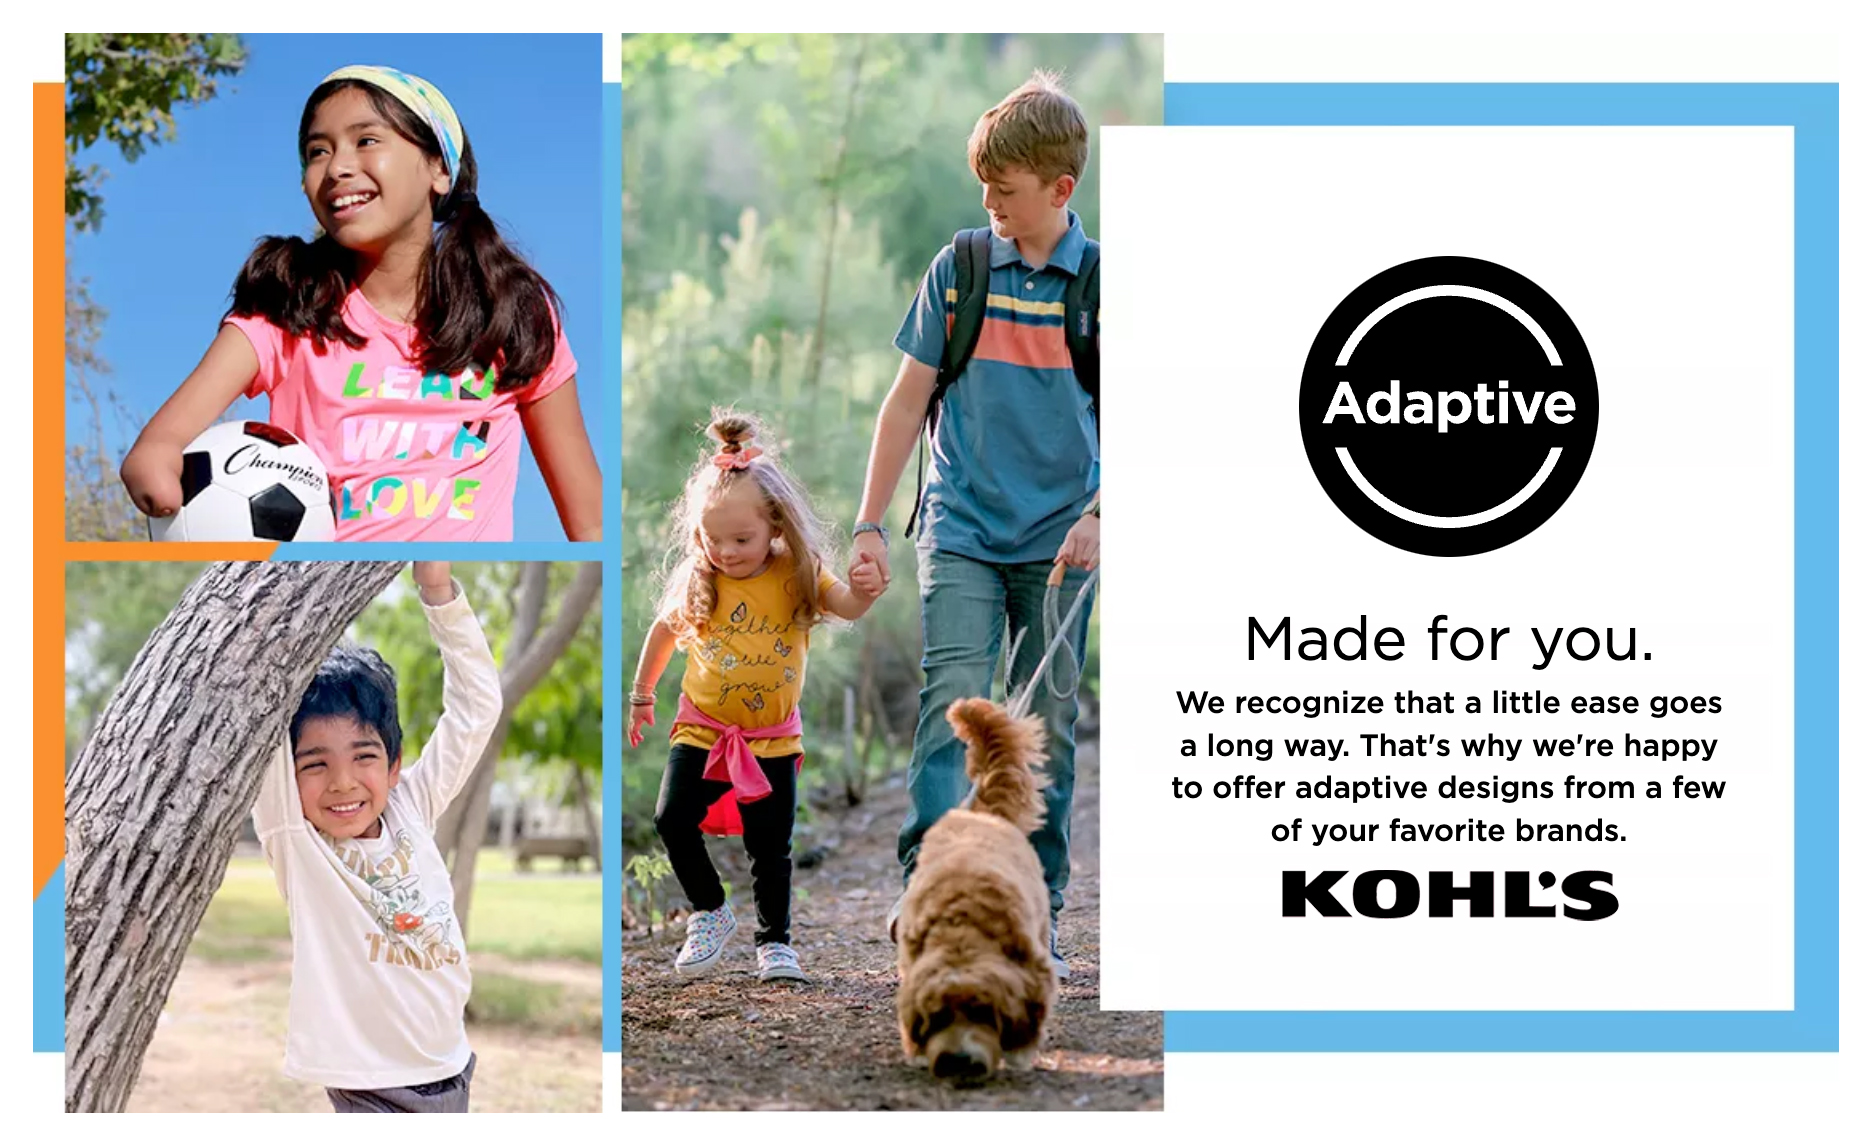 Adaptive clothing: Target, Kohl's and J.C. Penney are creating